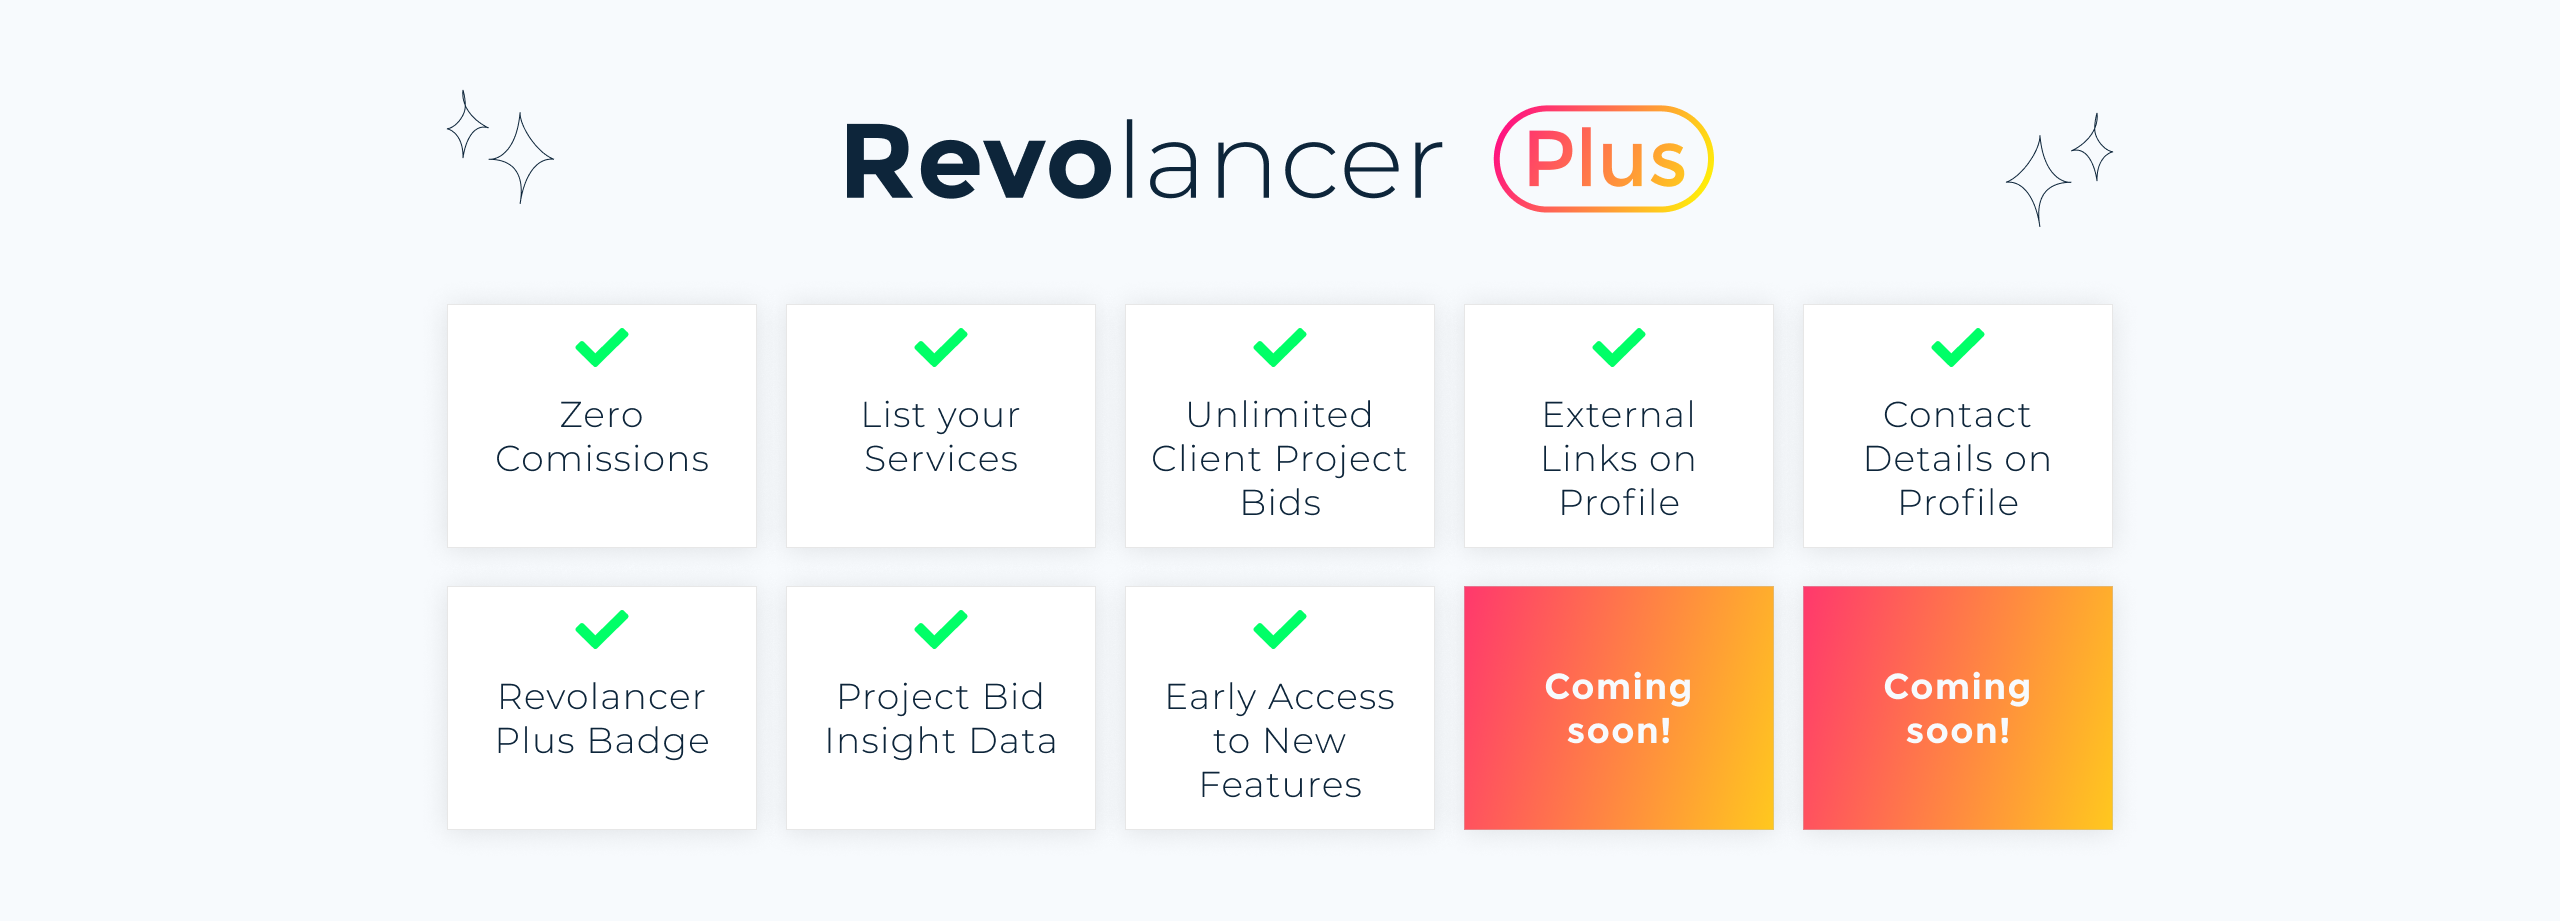 teasing new features of Revolancer Plus, 3-month trial available